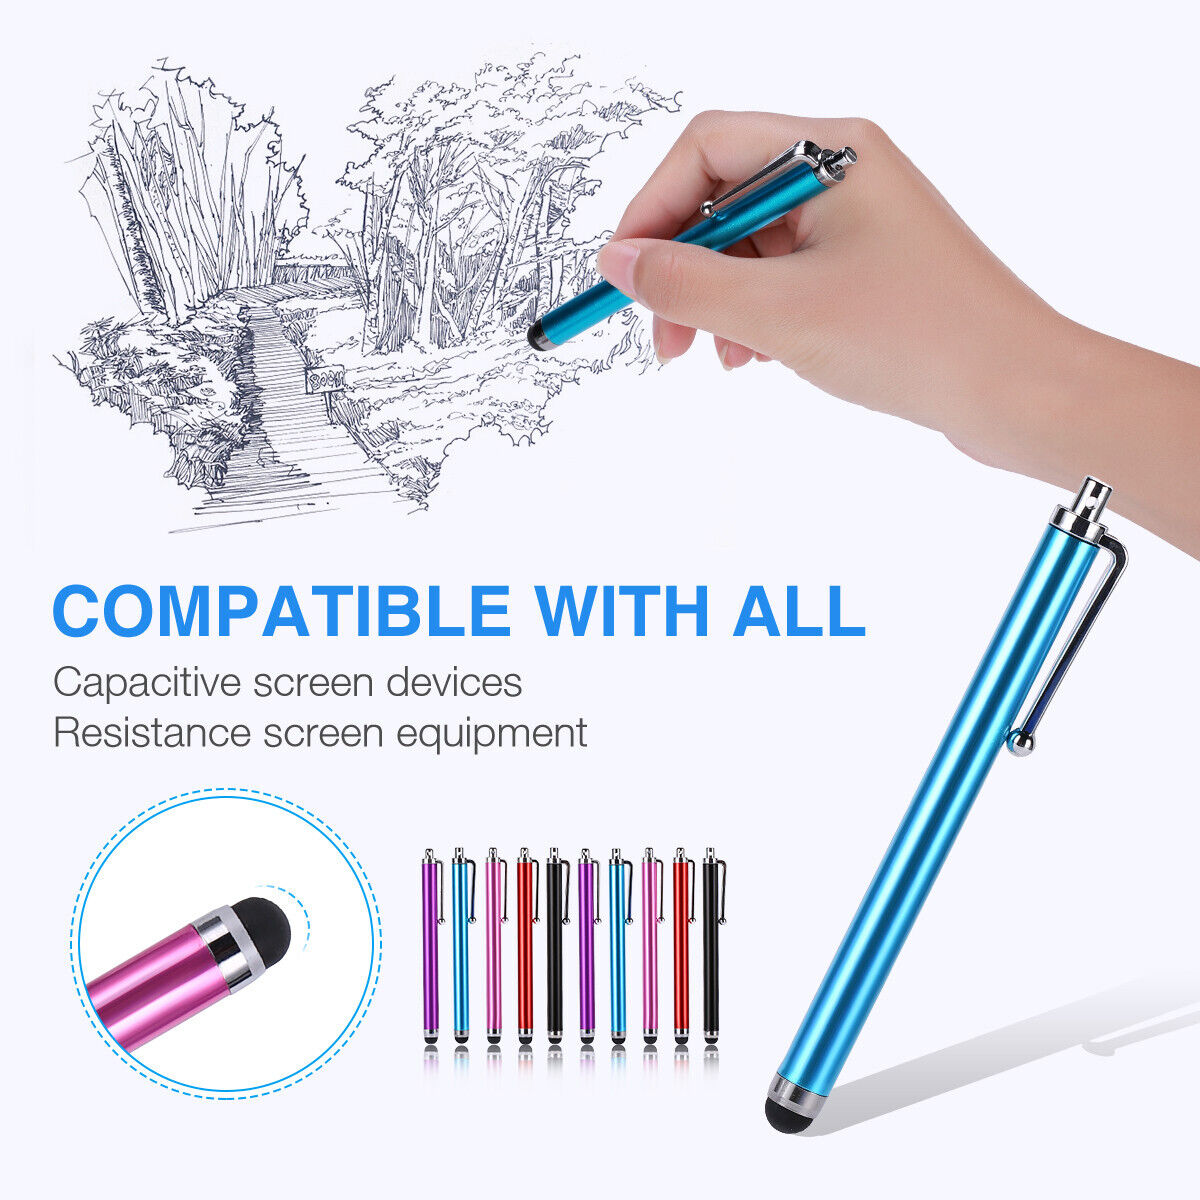 10 Capacitive Touch Screen Stylus Pen Universal For iPhone iPad Samsung Tablet Ombar Universal Touch Screen Stylus/Pen - фотография #4